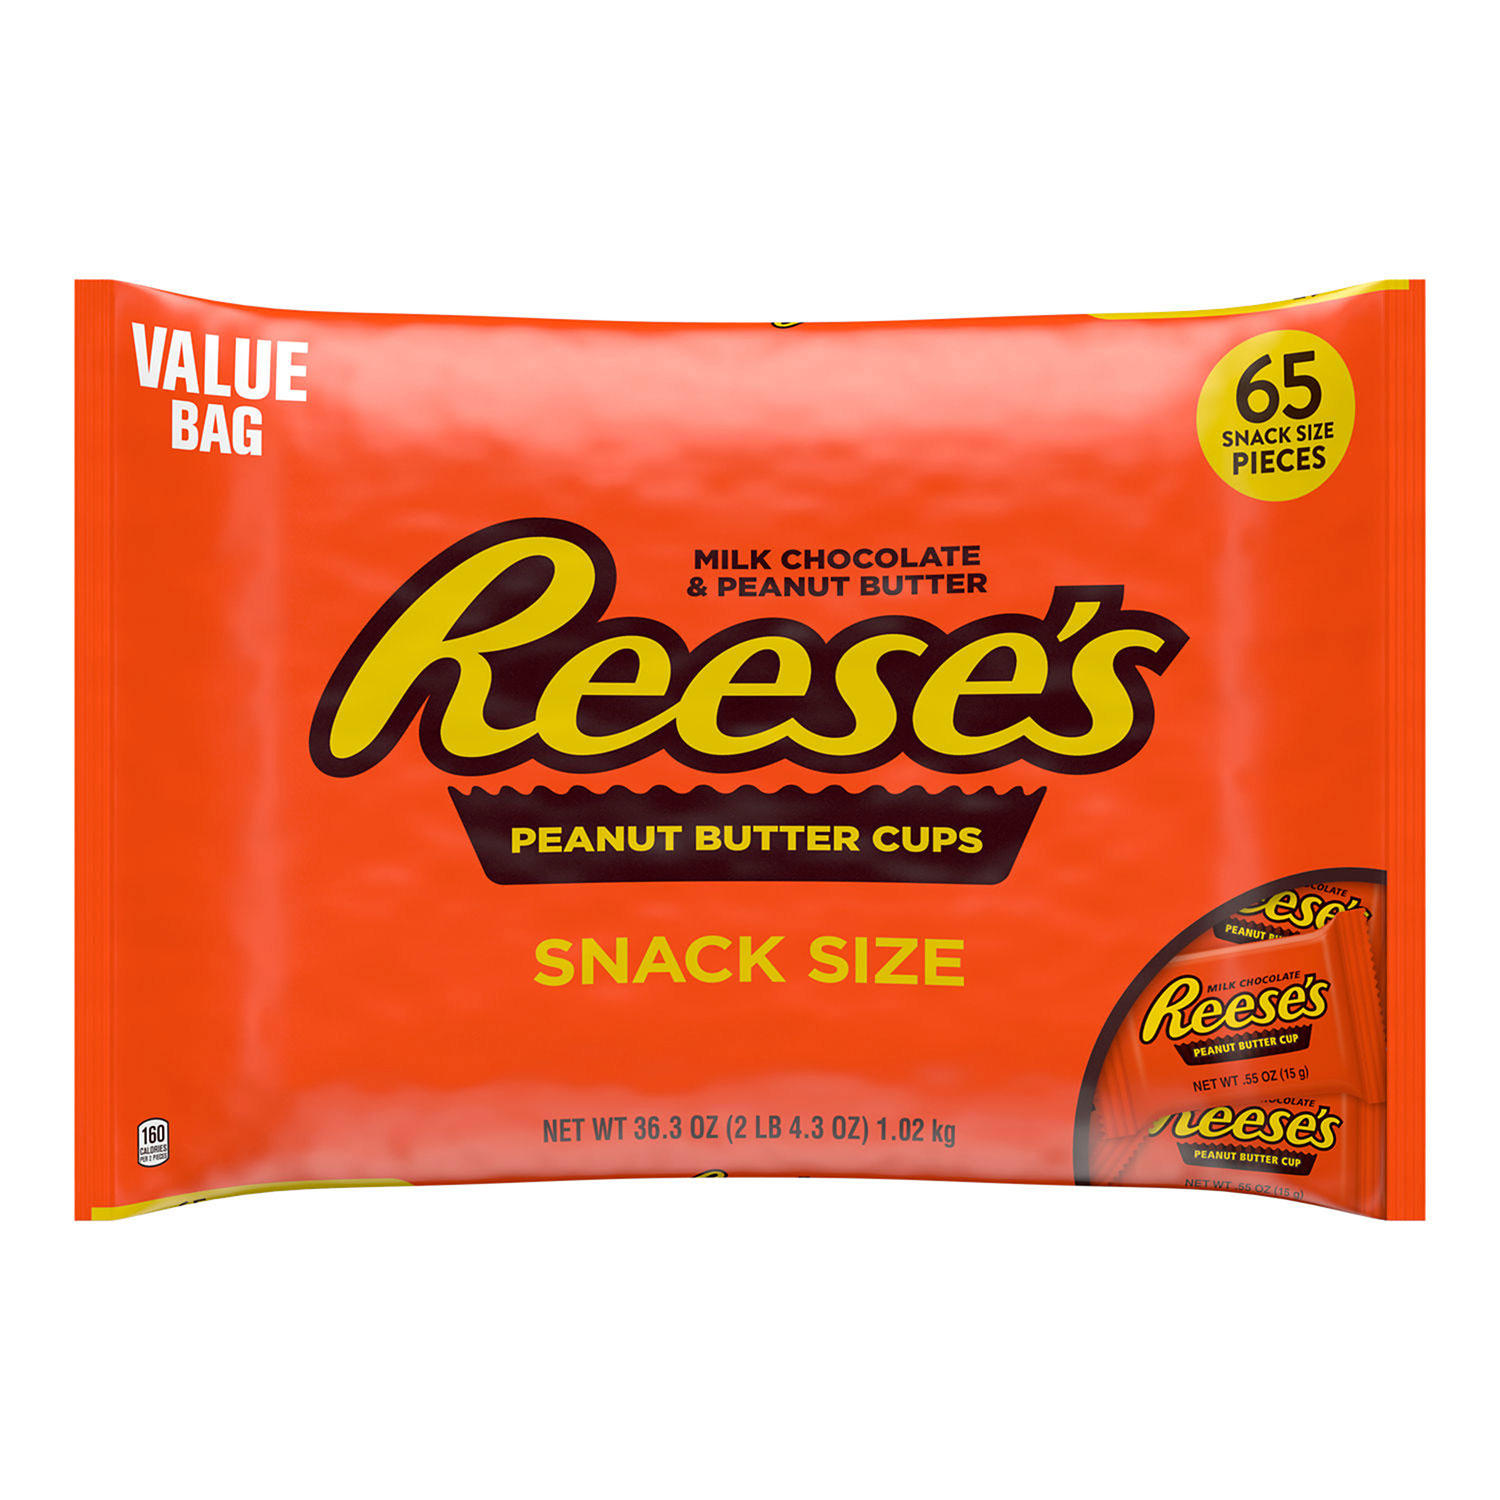 REESE'S Milk Chocolate Peanut Butter Cups, Snack Size, 65 pcs.